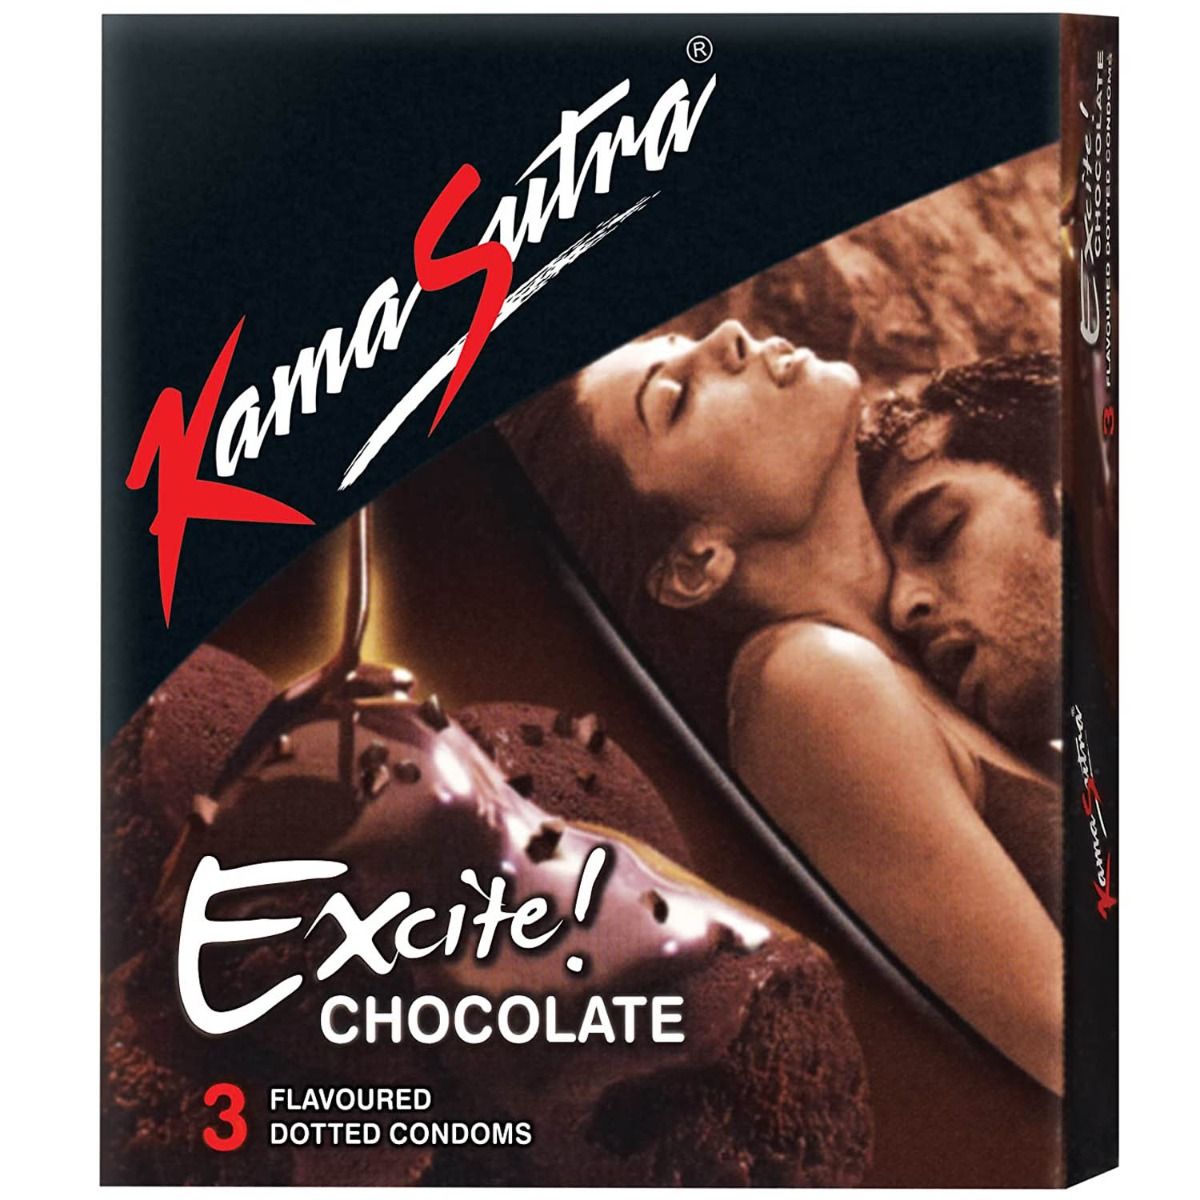 Buy Kamasutra Chocolate Flavoured Condoms, 3 Count Online